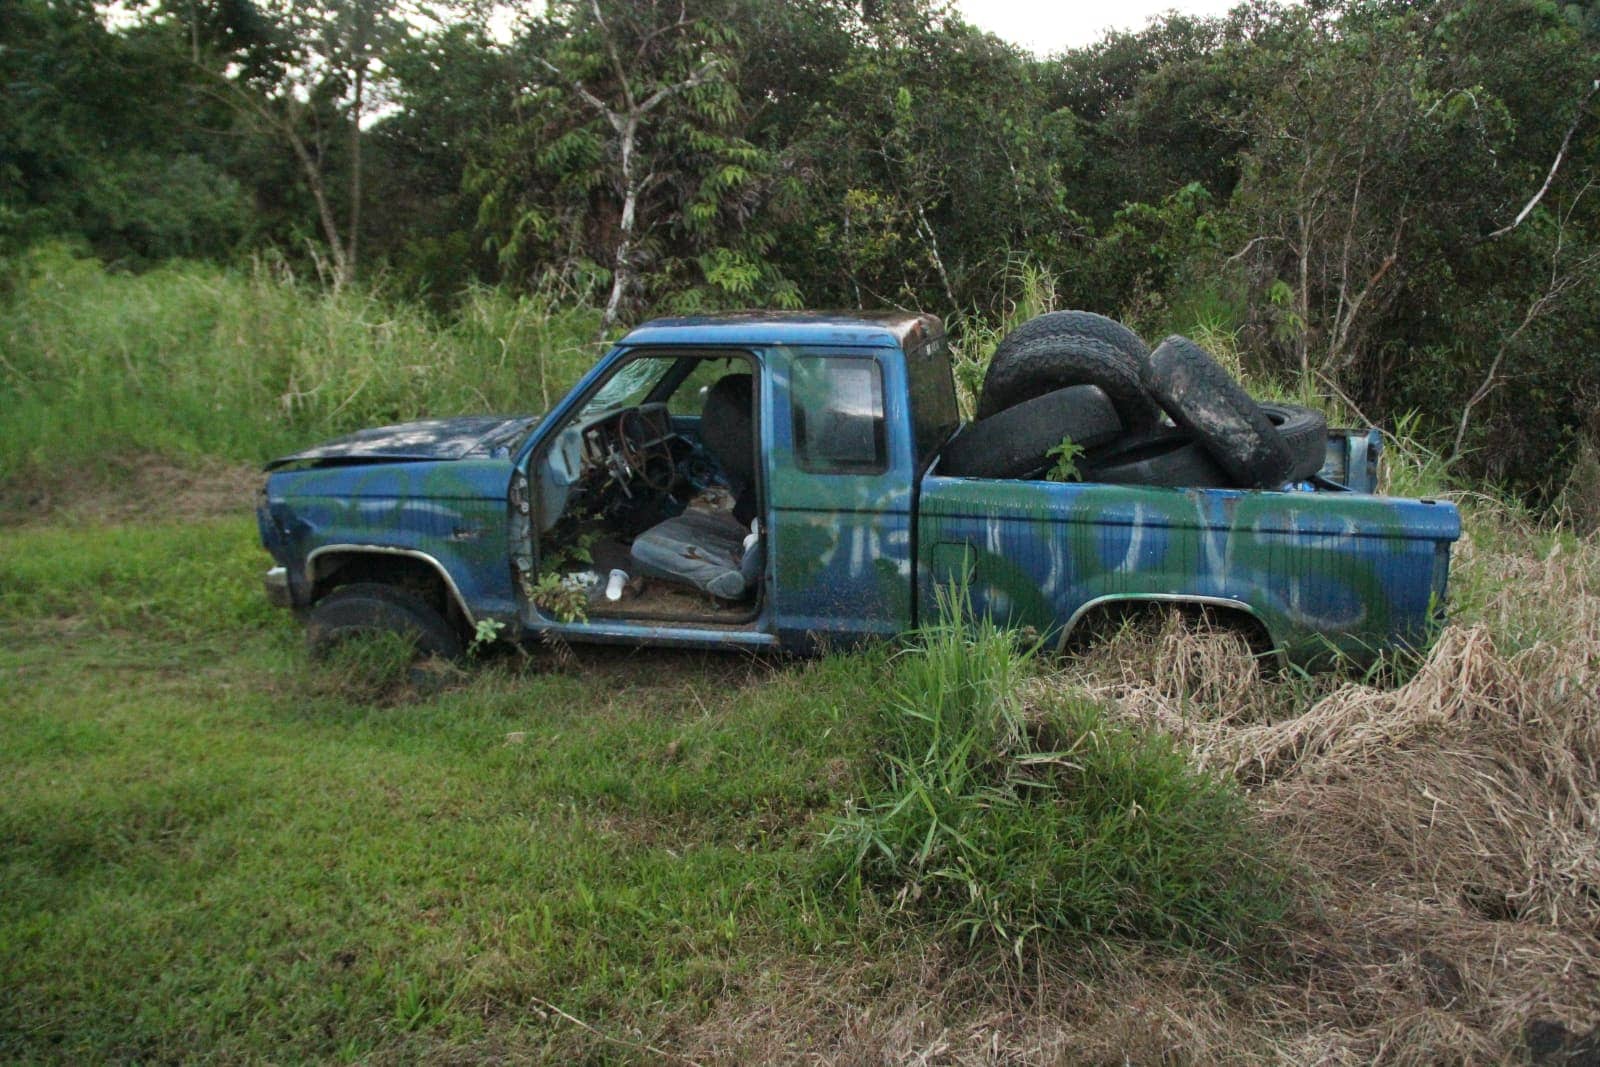 Old truck parked in grass with tires in box